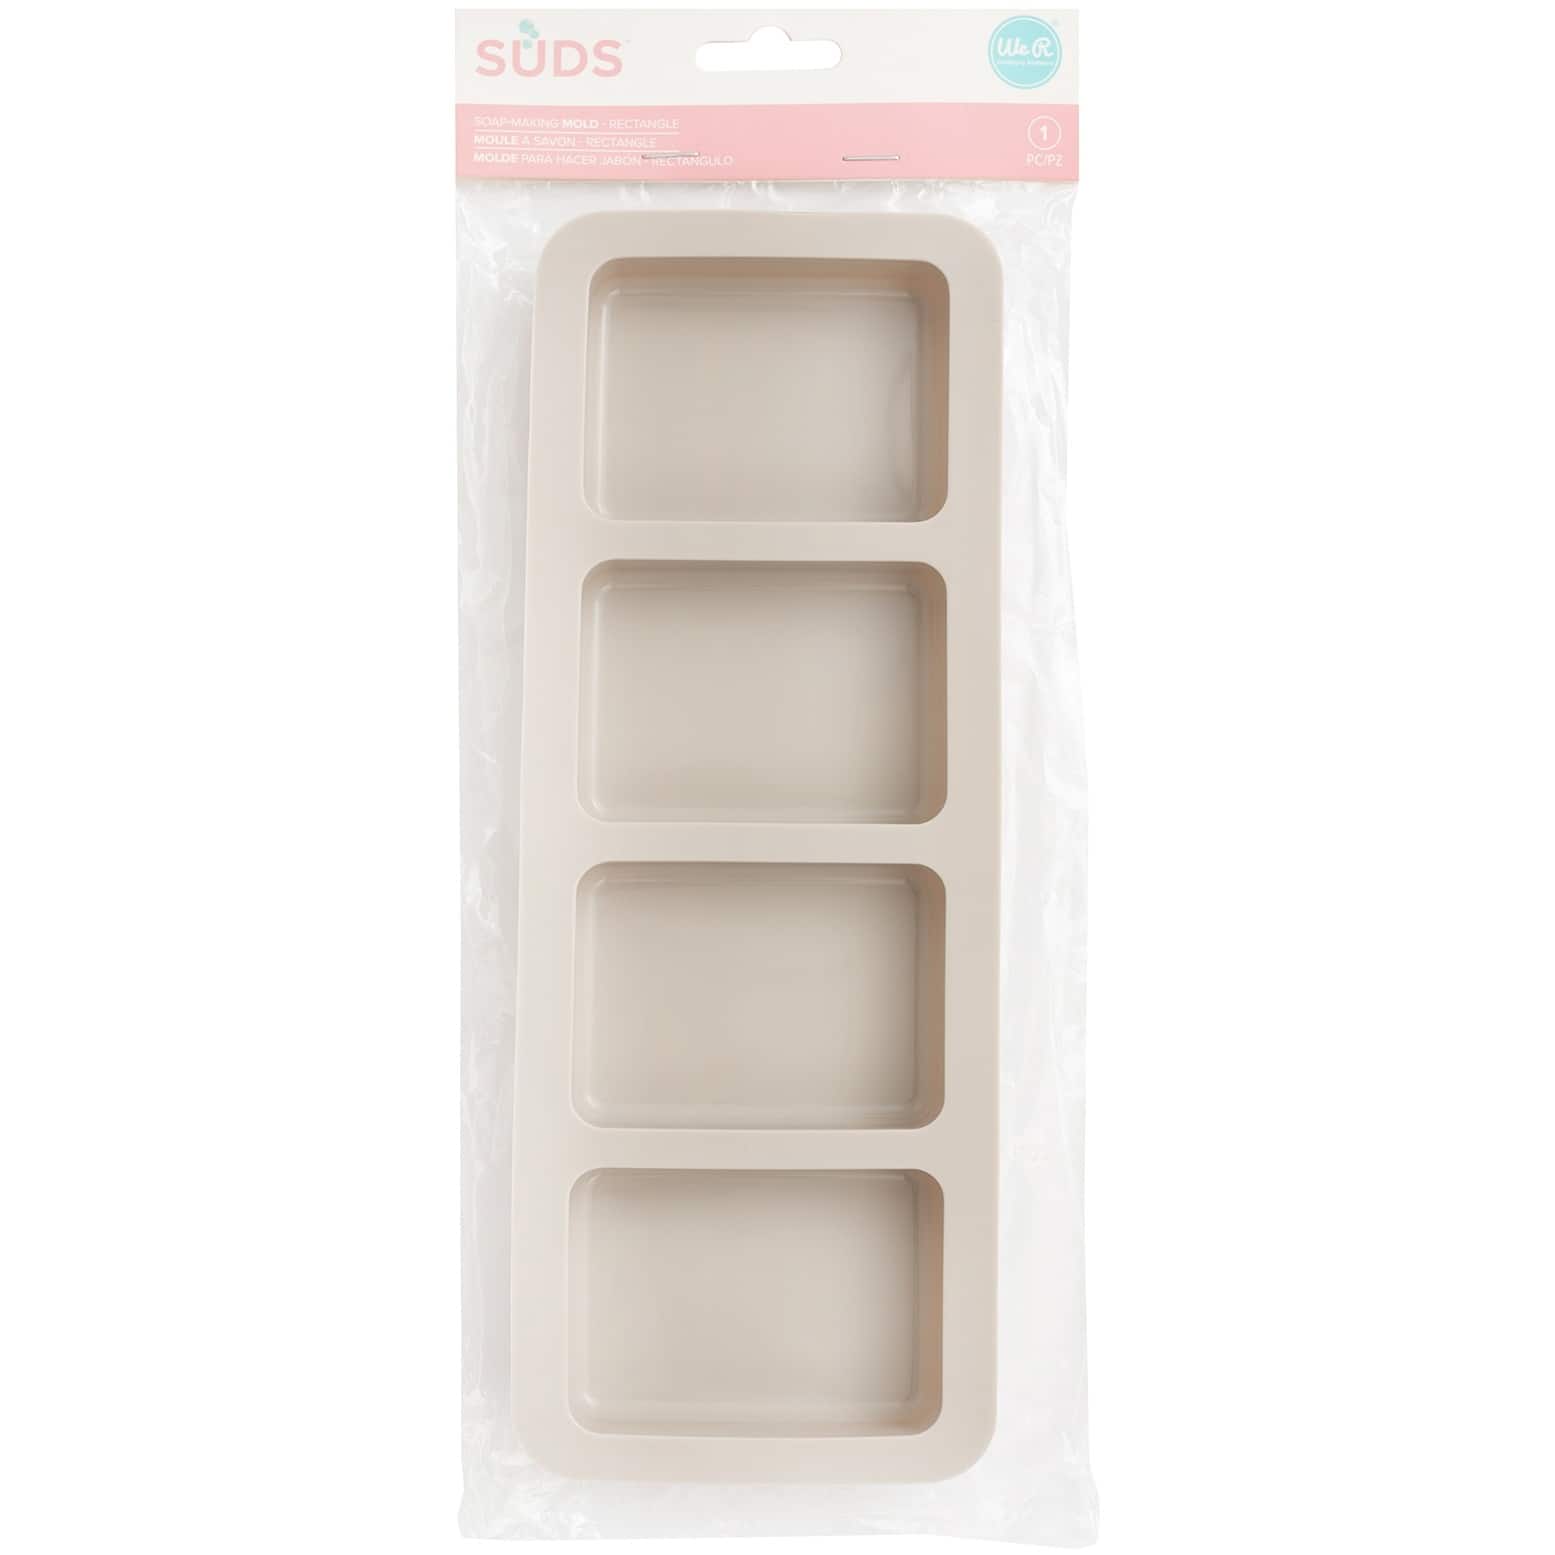 Silicone Round Soap Mold by Make Market®, Michaels